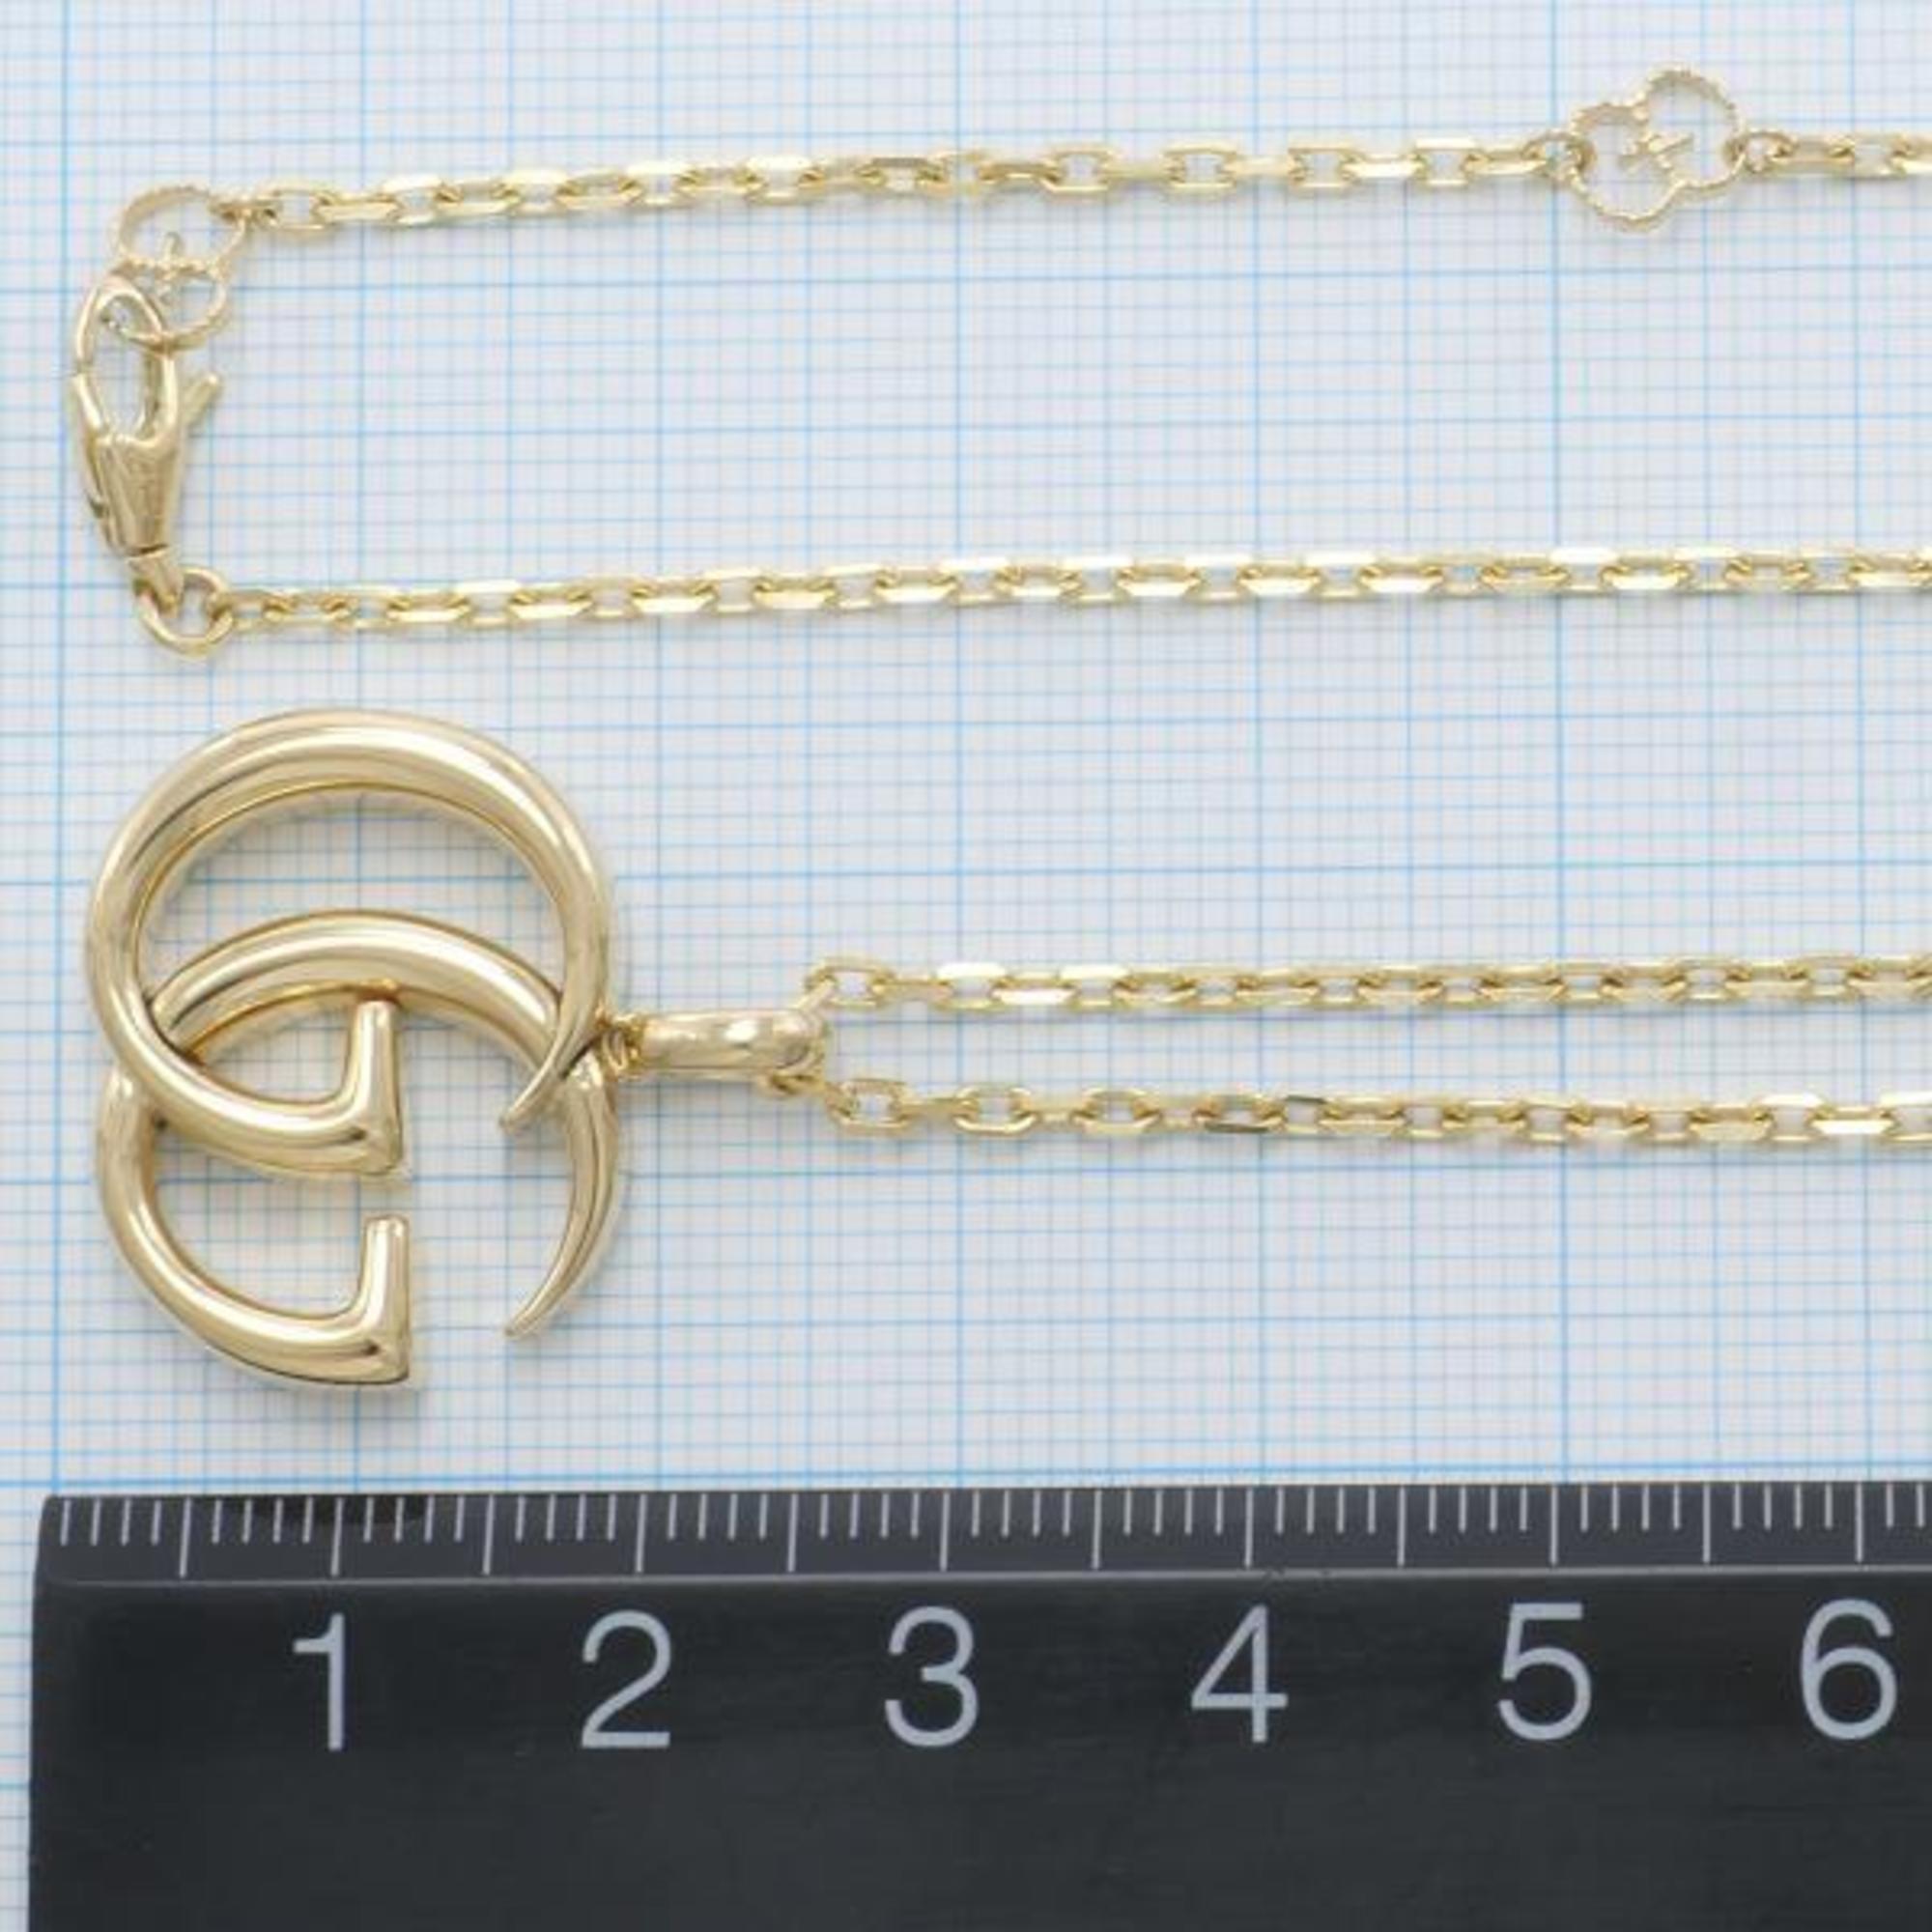 Gucci Double G K18YG Necklace Total Weight Approx. 16.4g 63cm Jewelry